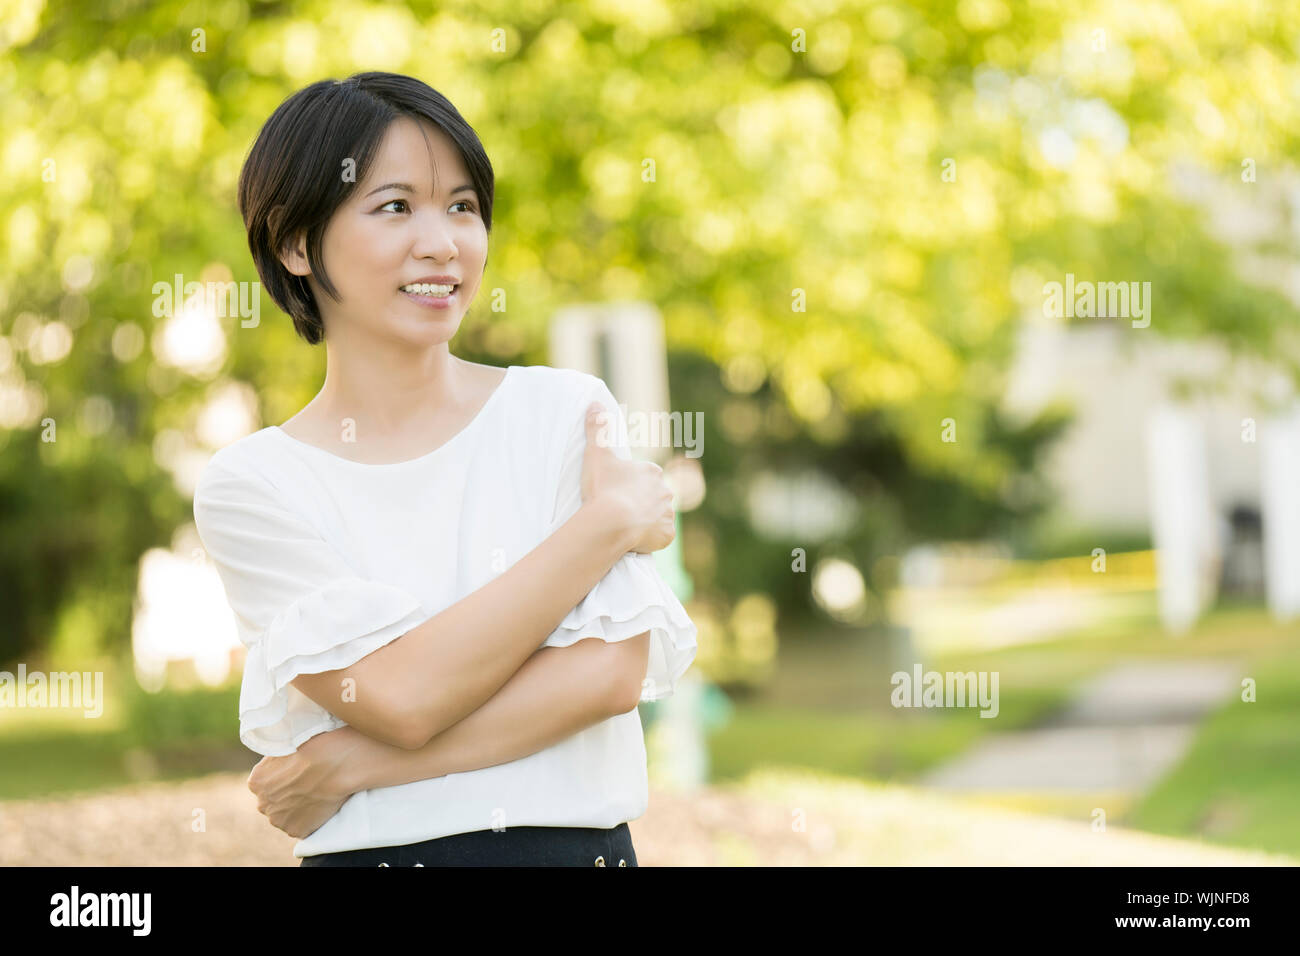 Portrait young woman outdoor back light Stock Photo